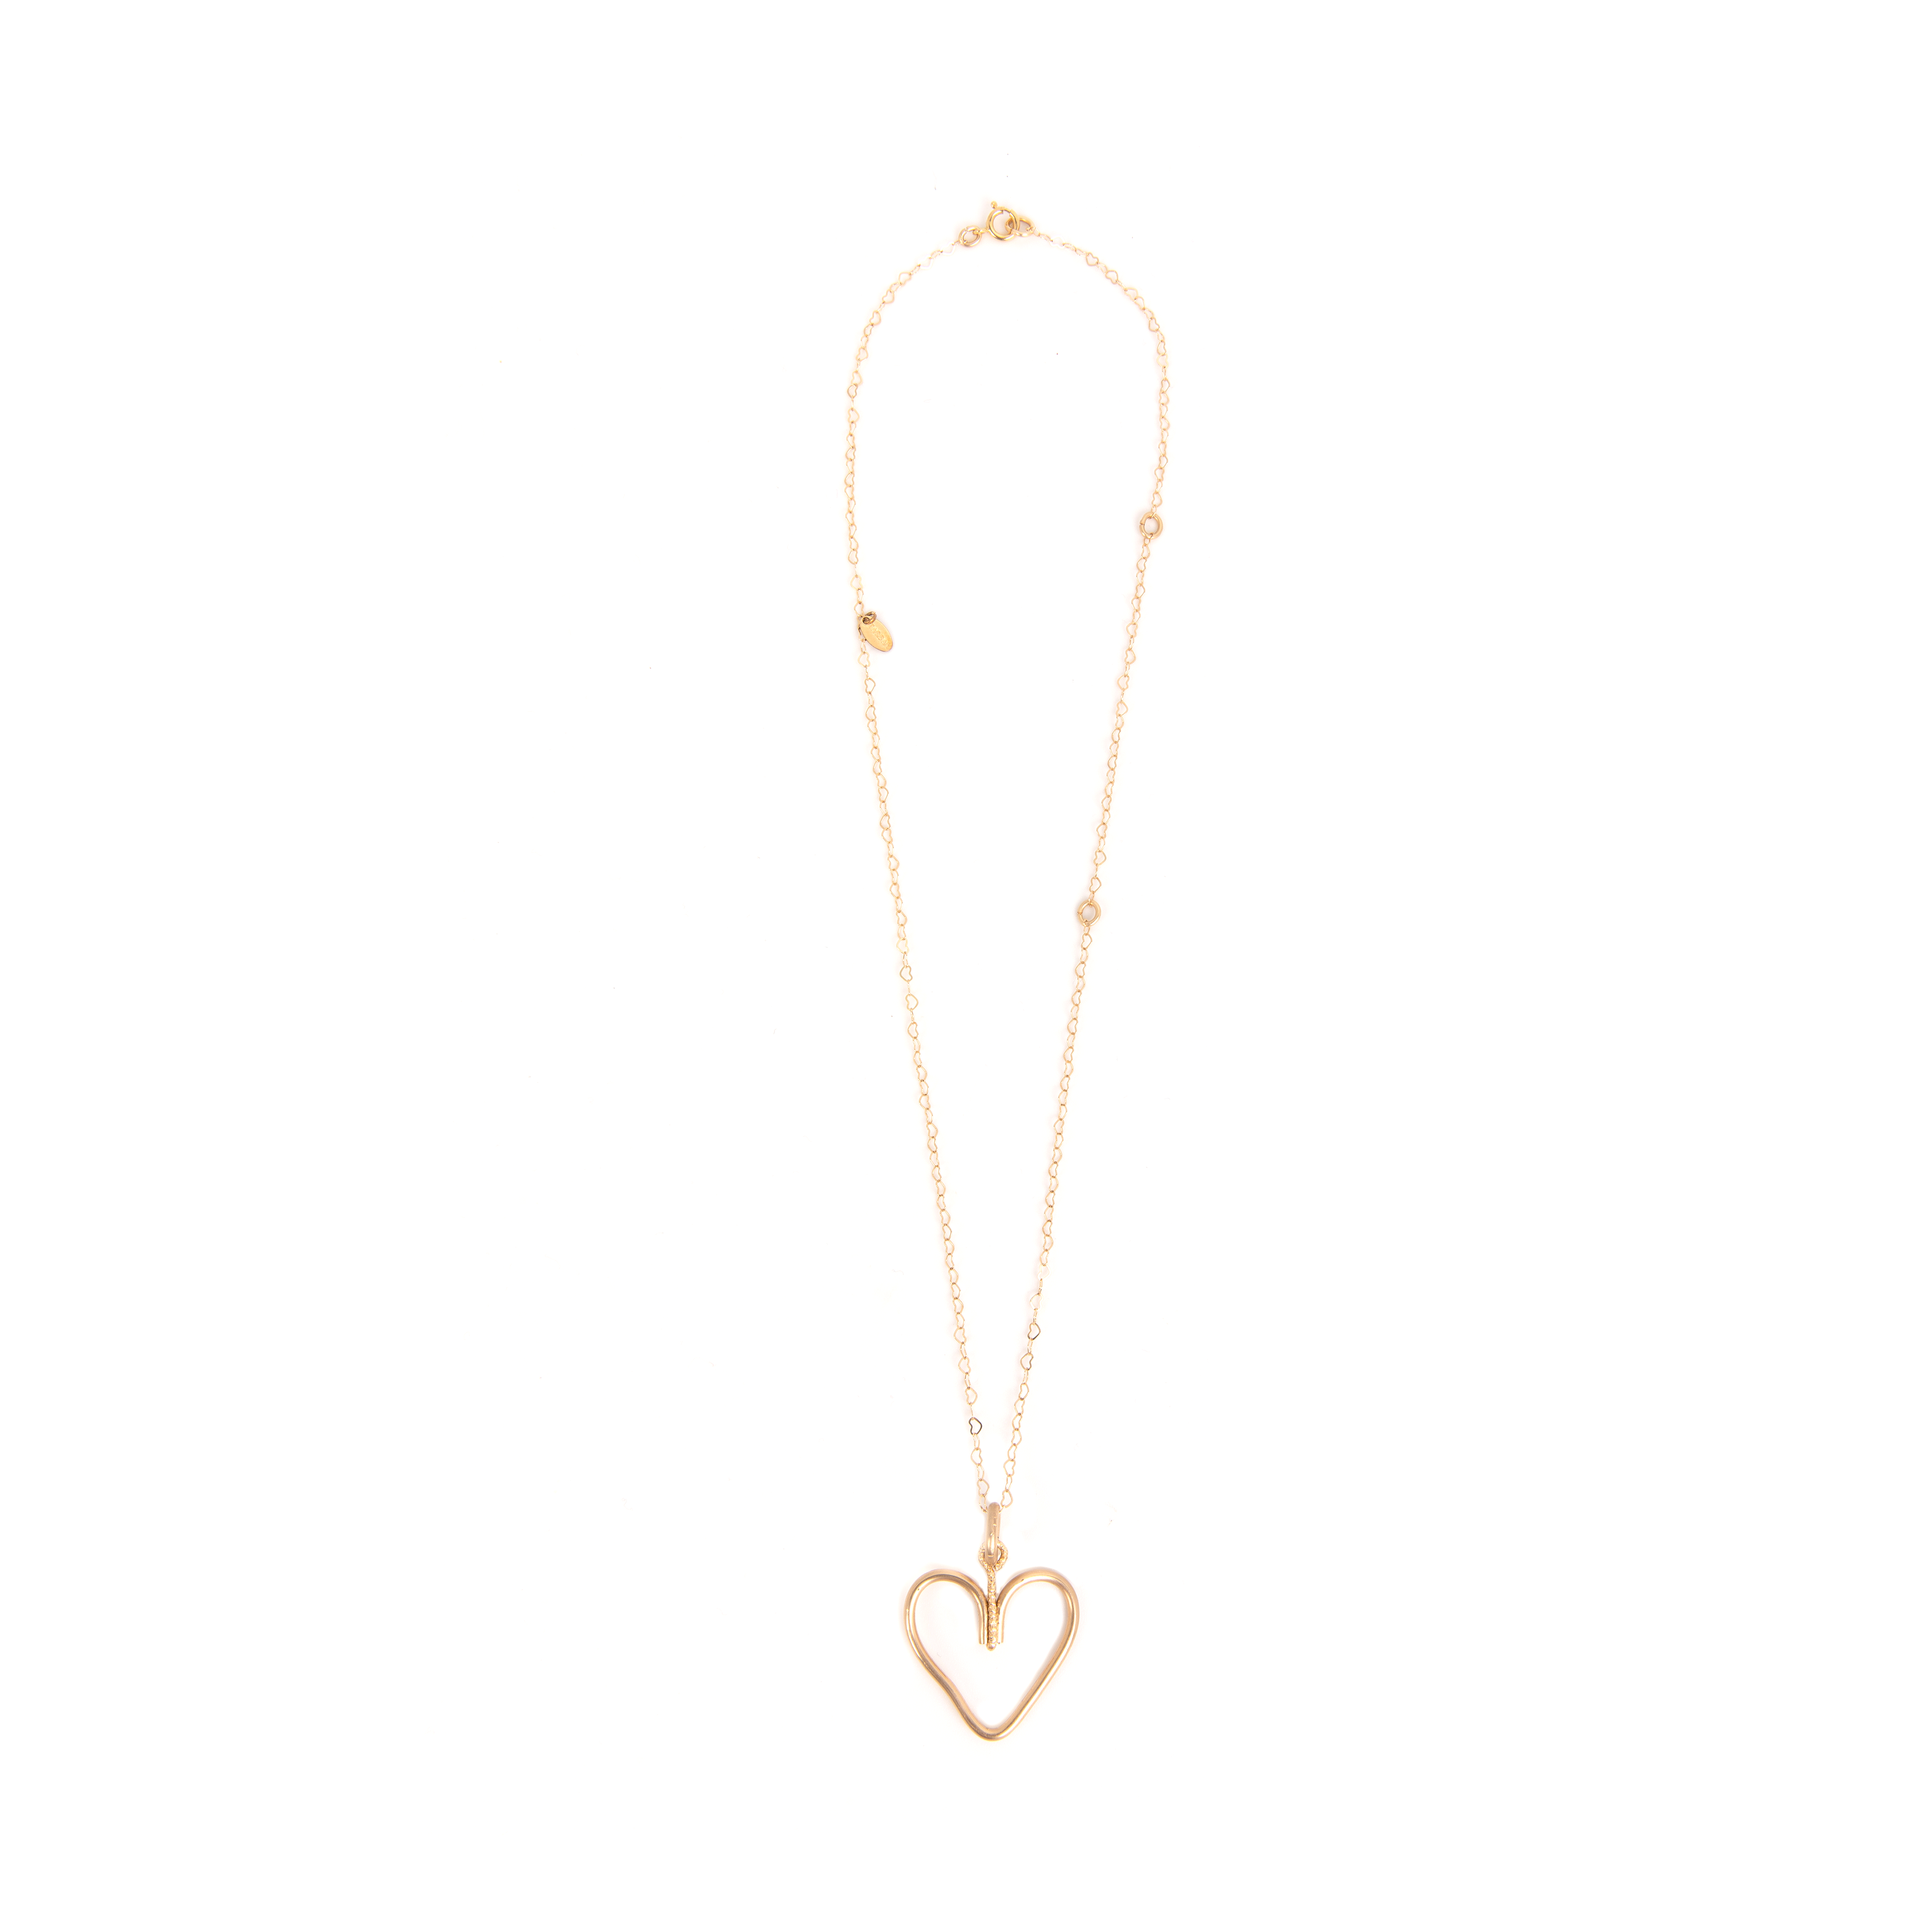 Corazon Necklace with hearts chain #6 - Yellow Gold Necklaces TARBAY   